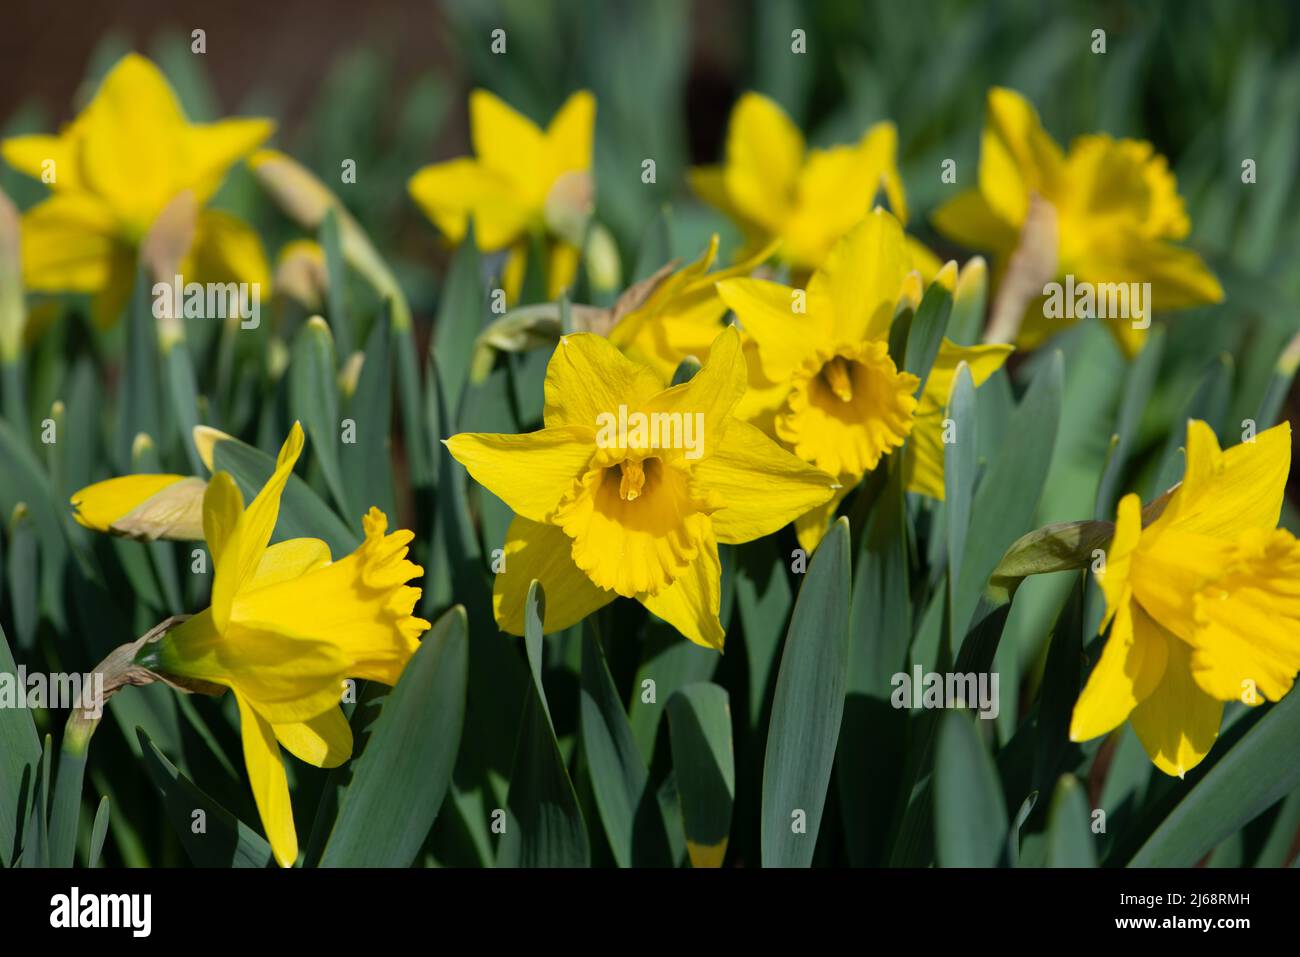 Narcissus Saint Keverne, yellow Daffodil flowers blooming in the garden. Stock Photo